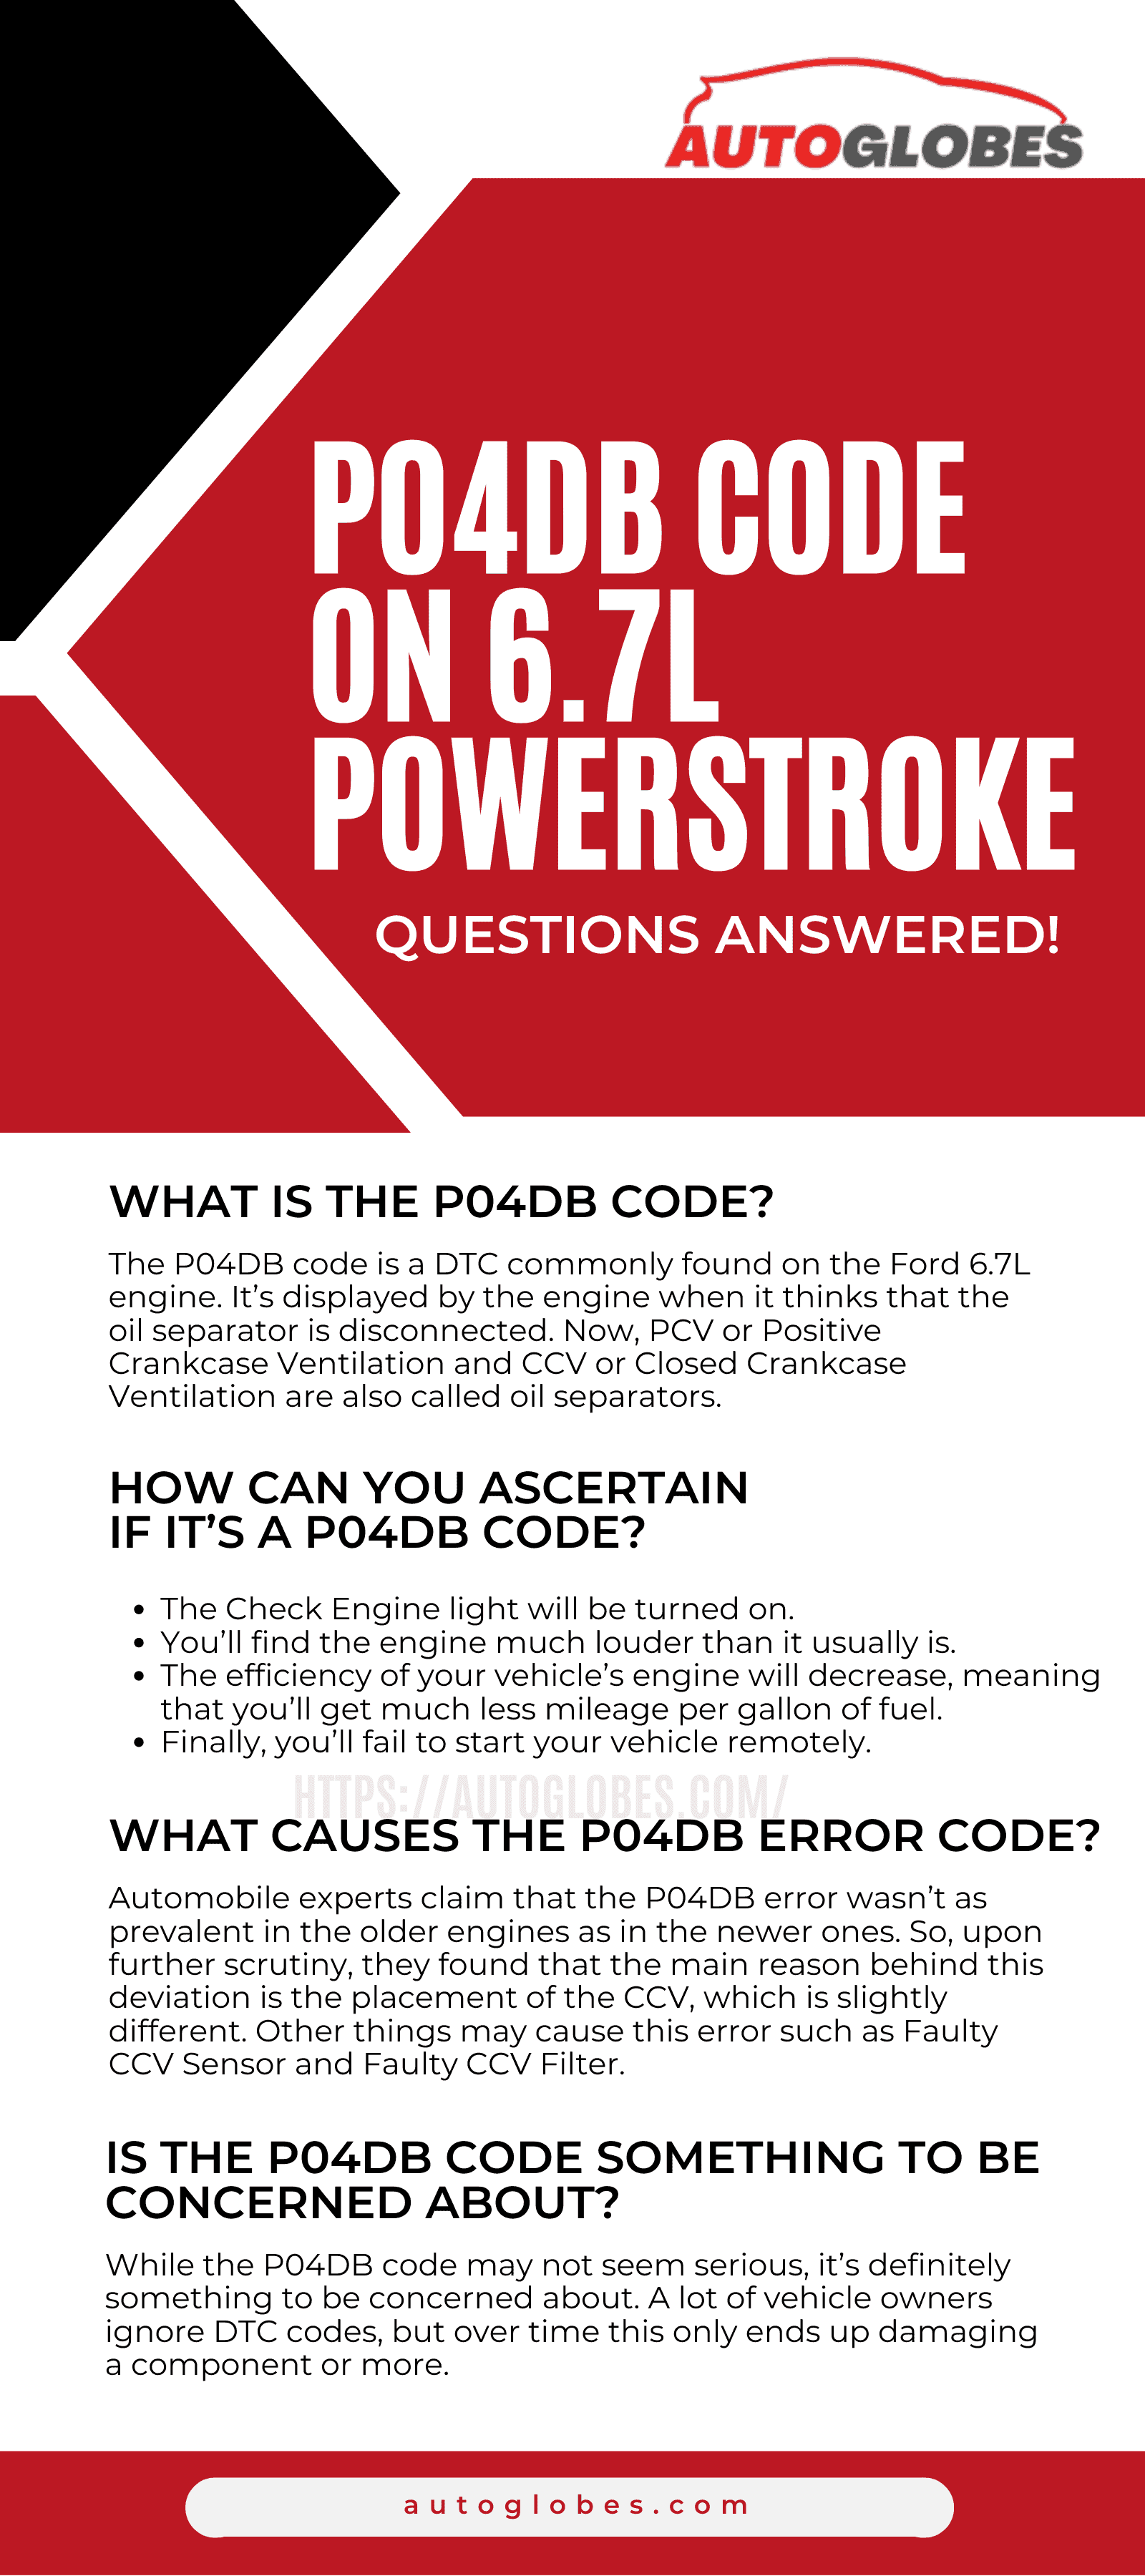 P04DB Code on 6.7L Powerstroke infographic